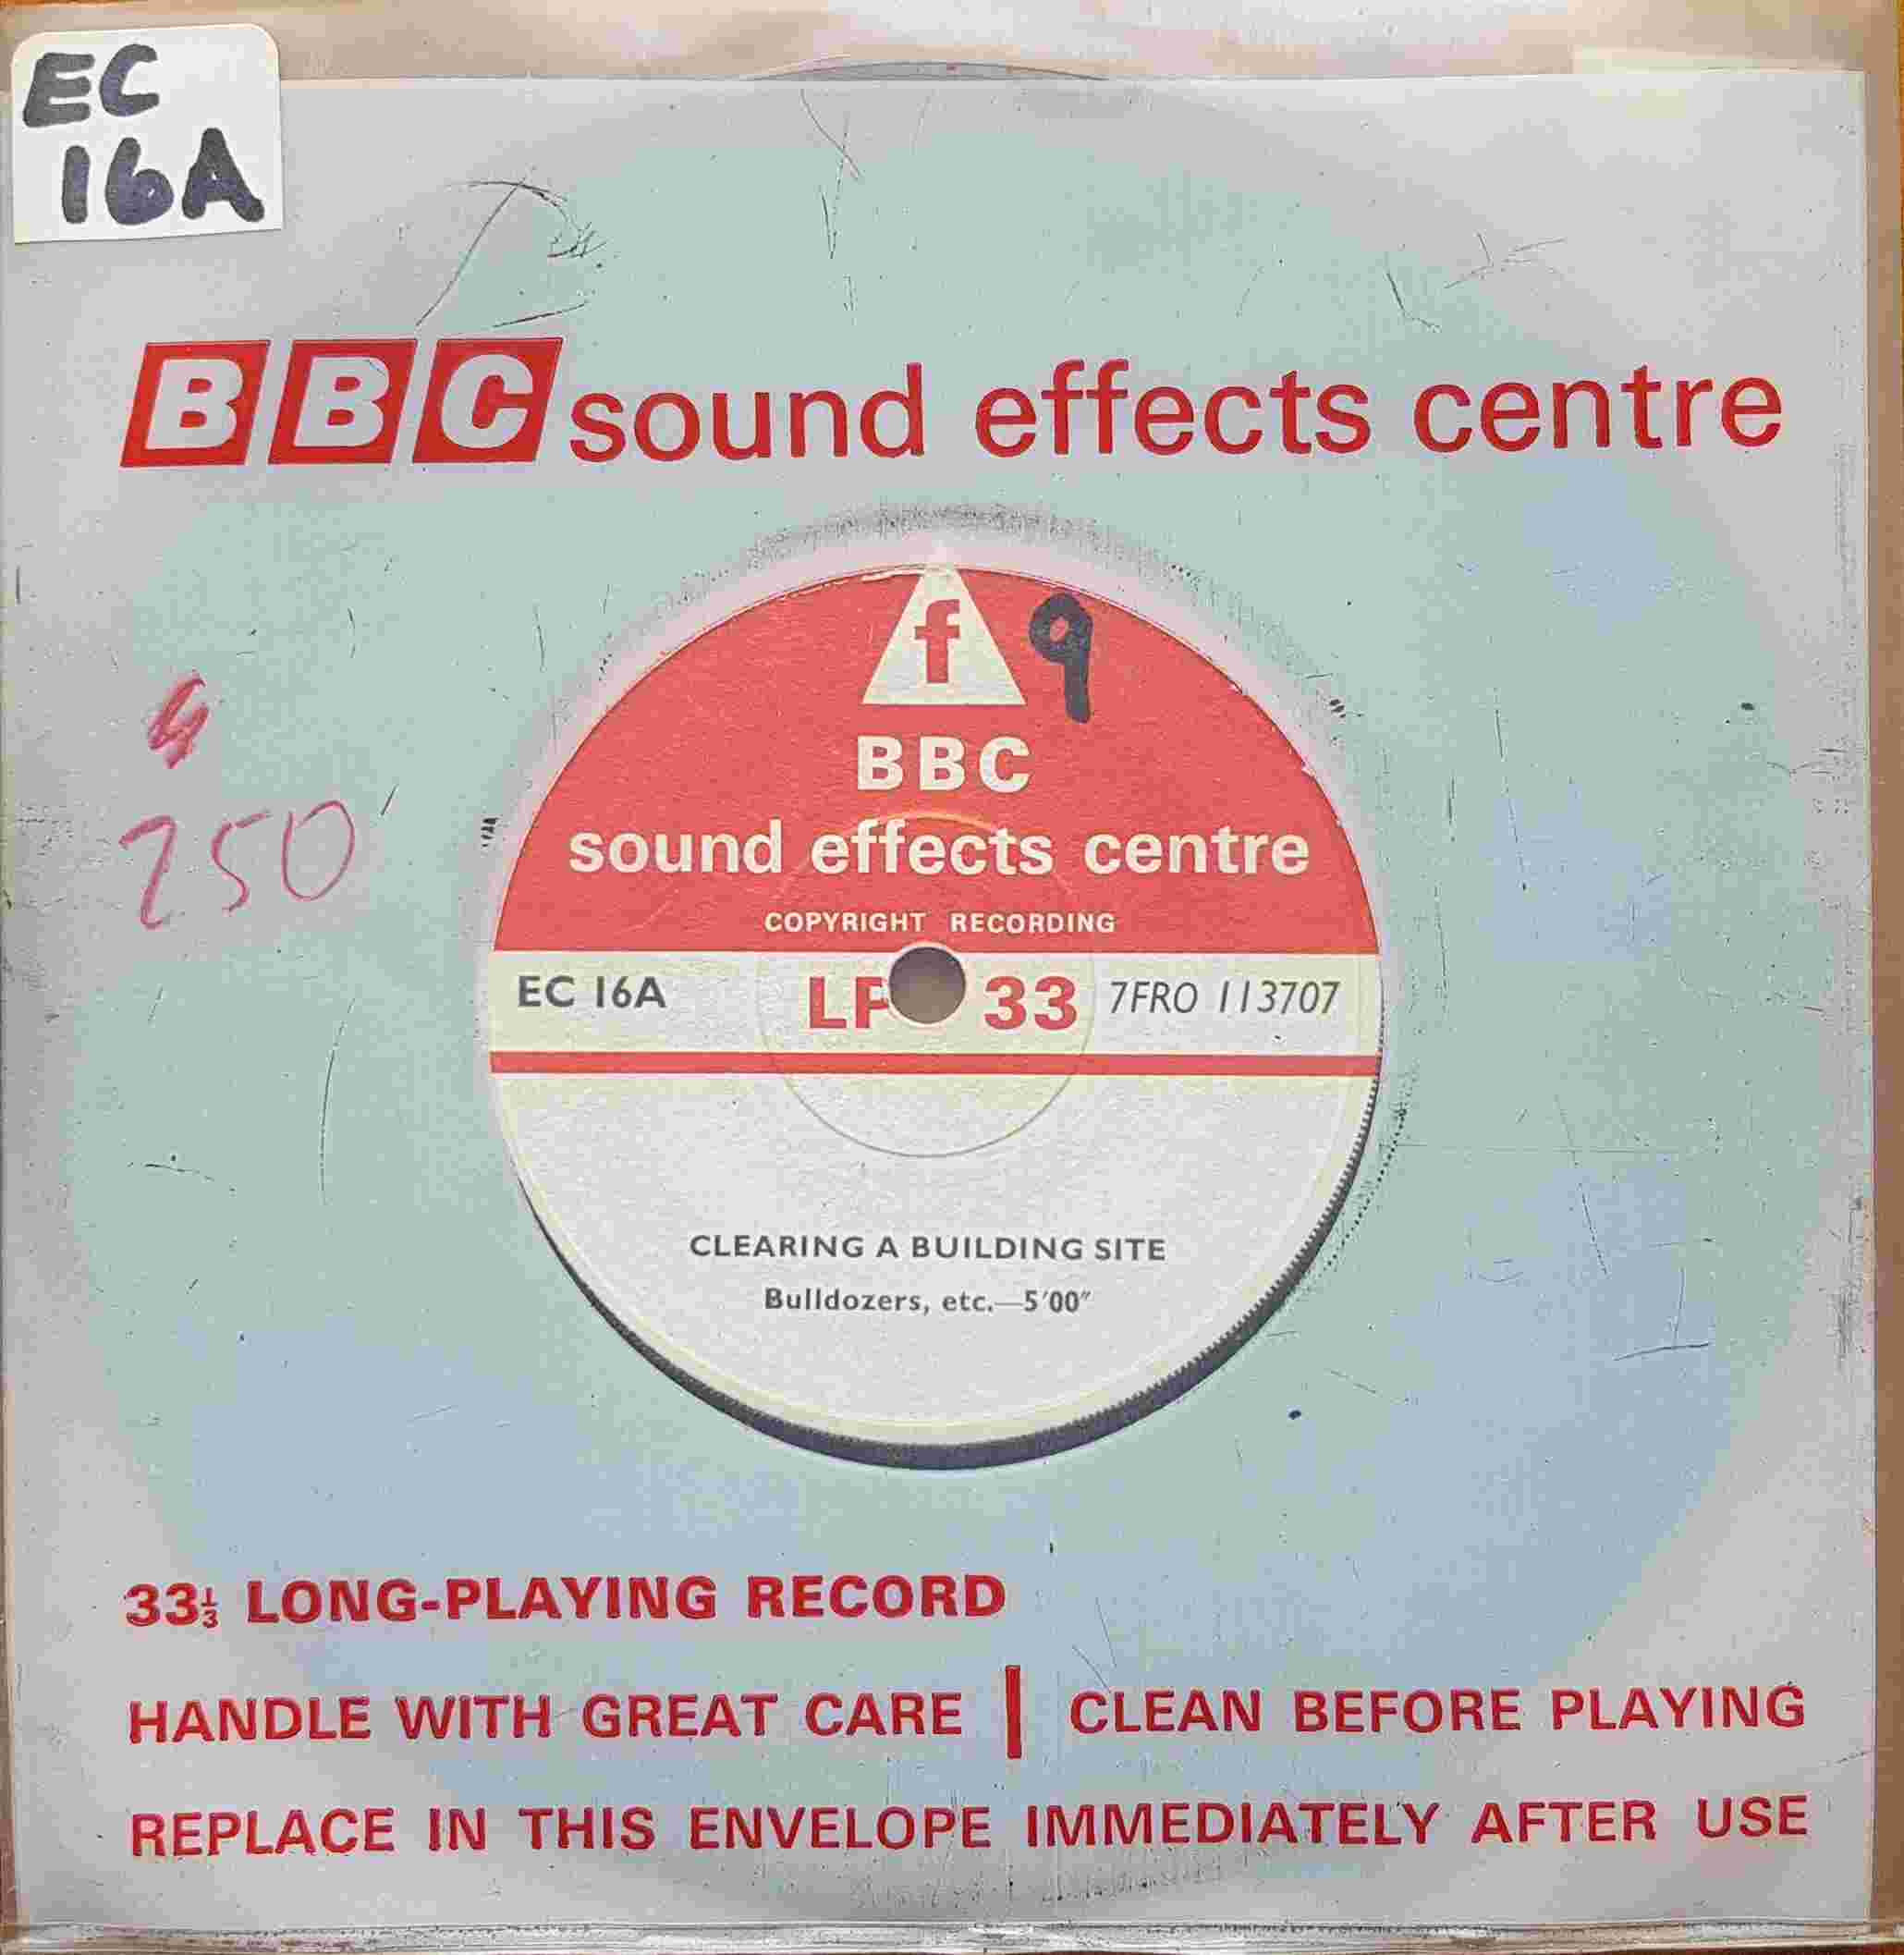 Picture of EC 16A Clearing a building site by artist Not registered from the BBC records and Tapes library